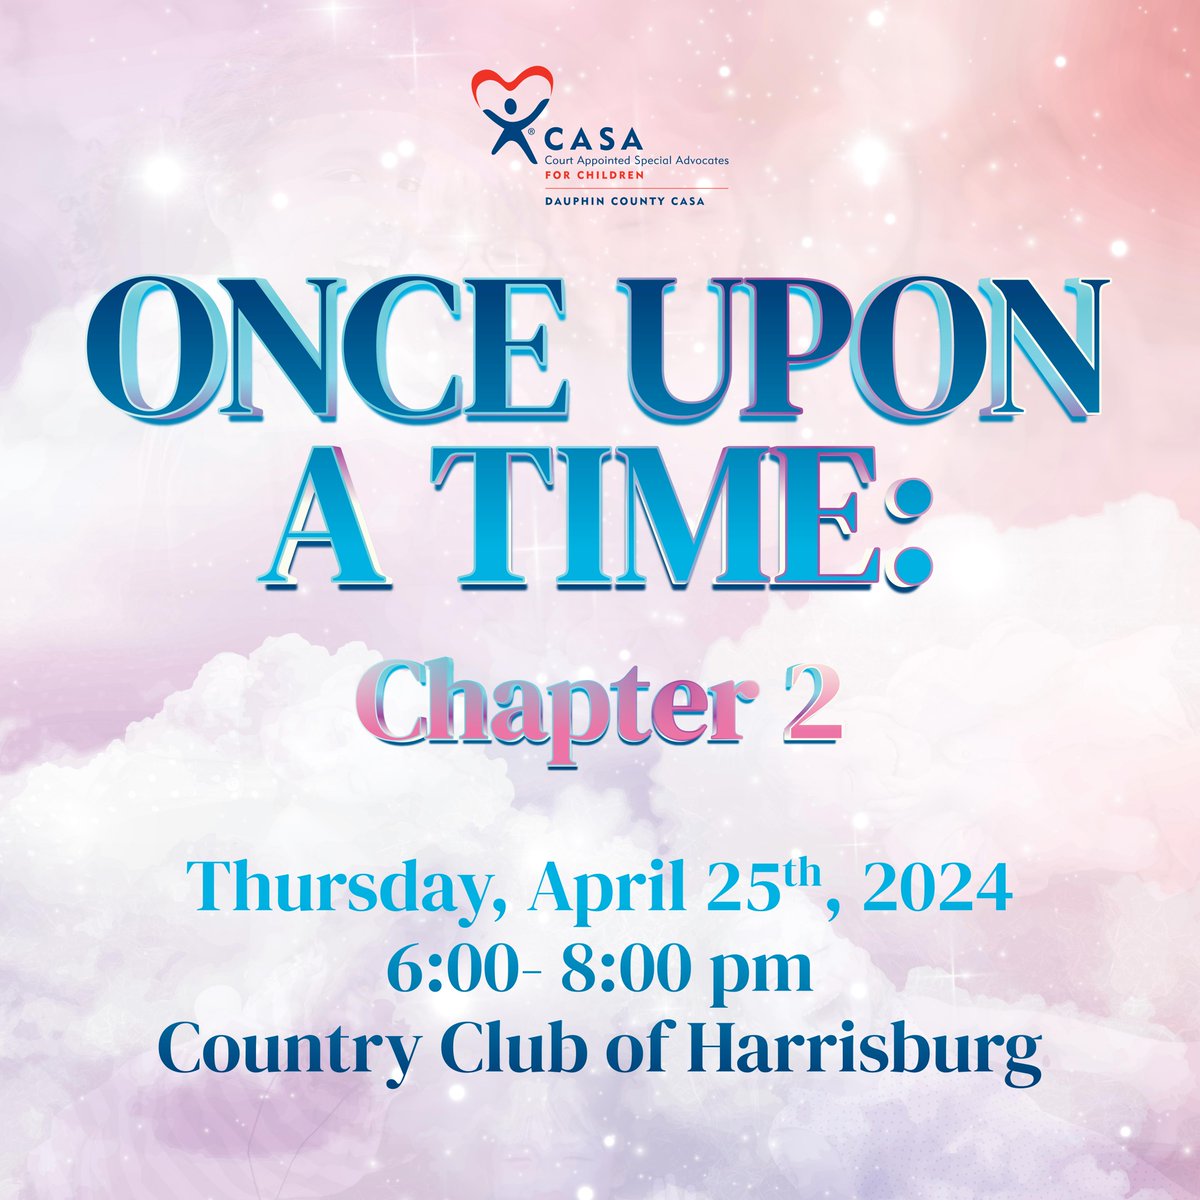 ONLY ONE WEEK TO GO! 🤩 Once Upon A Time: Chapter 2 is on April 25th from 6pm to 8pm @ The Country Club of Harrisburg 📖 ✨ Don't forget! Ticket sales end on April 20th at 11:59pm🎟️